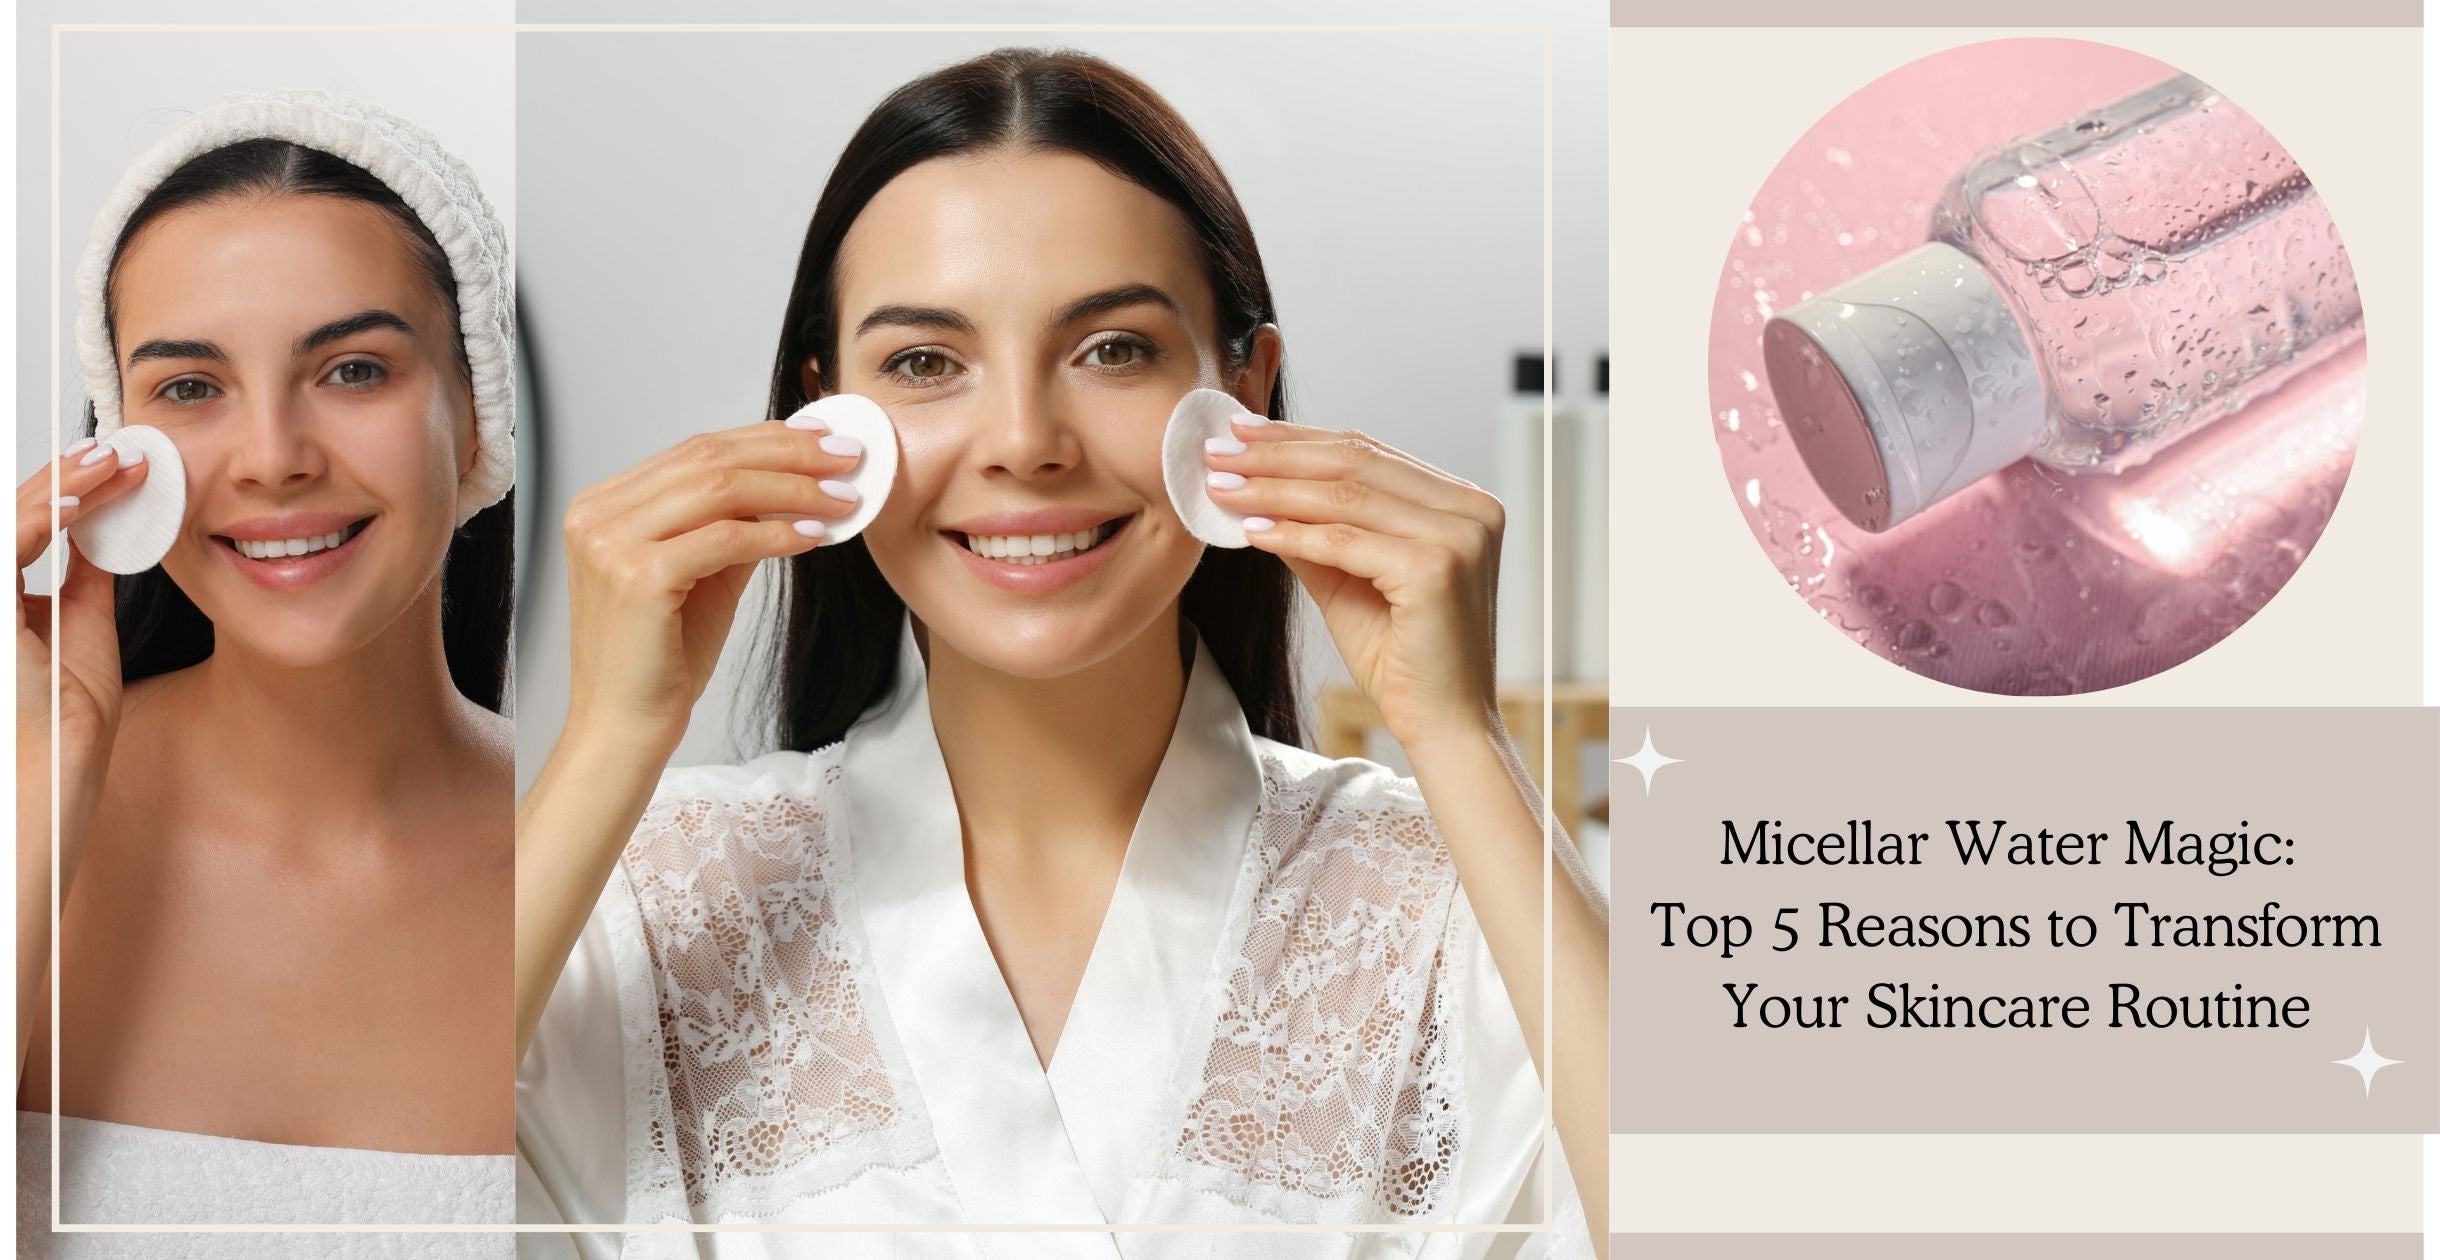 Micellar Water Magic: Top 5 Reasons to Transform Your Skincare Routine